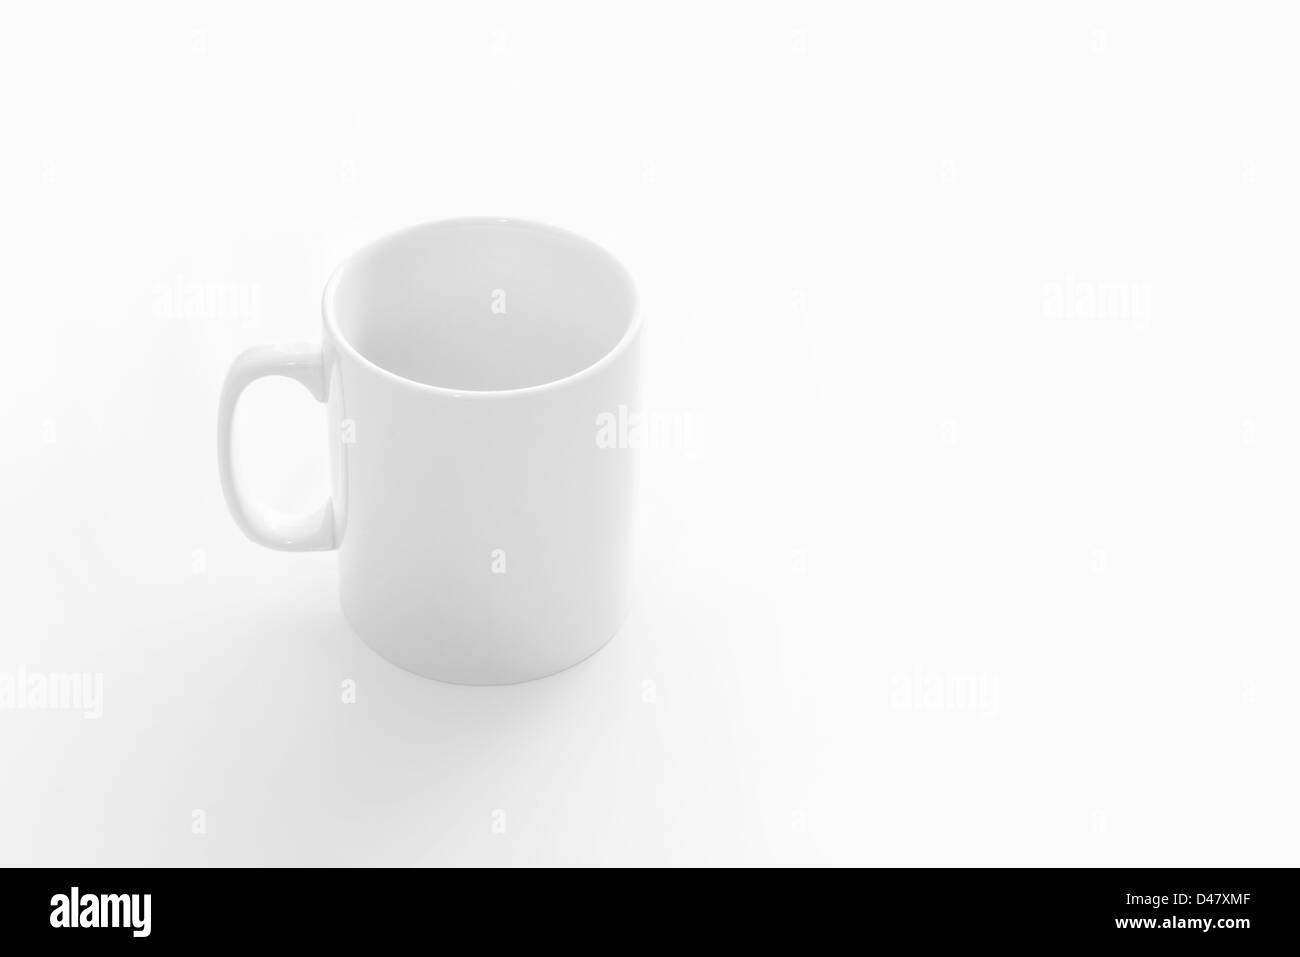 Big white empty cup on white table, front top view Stock Photo